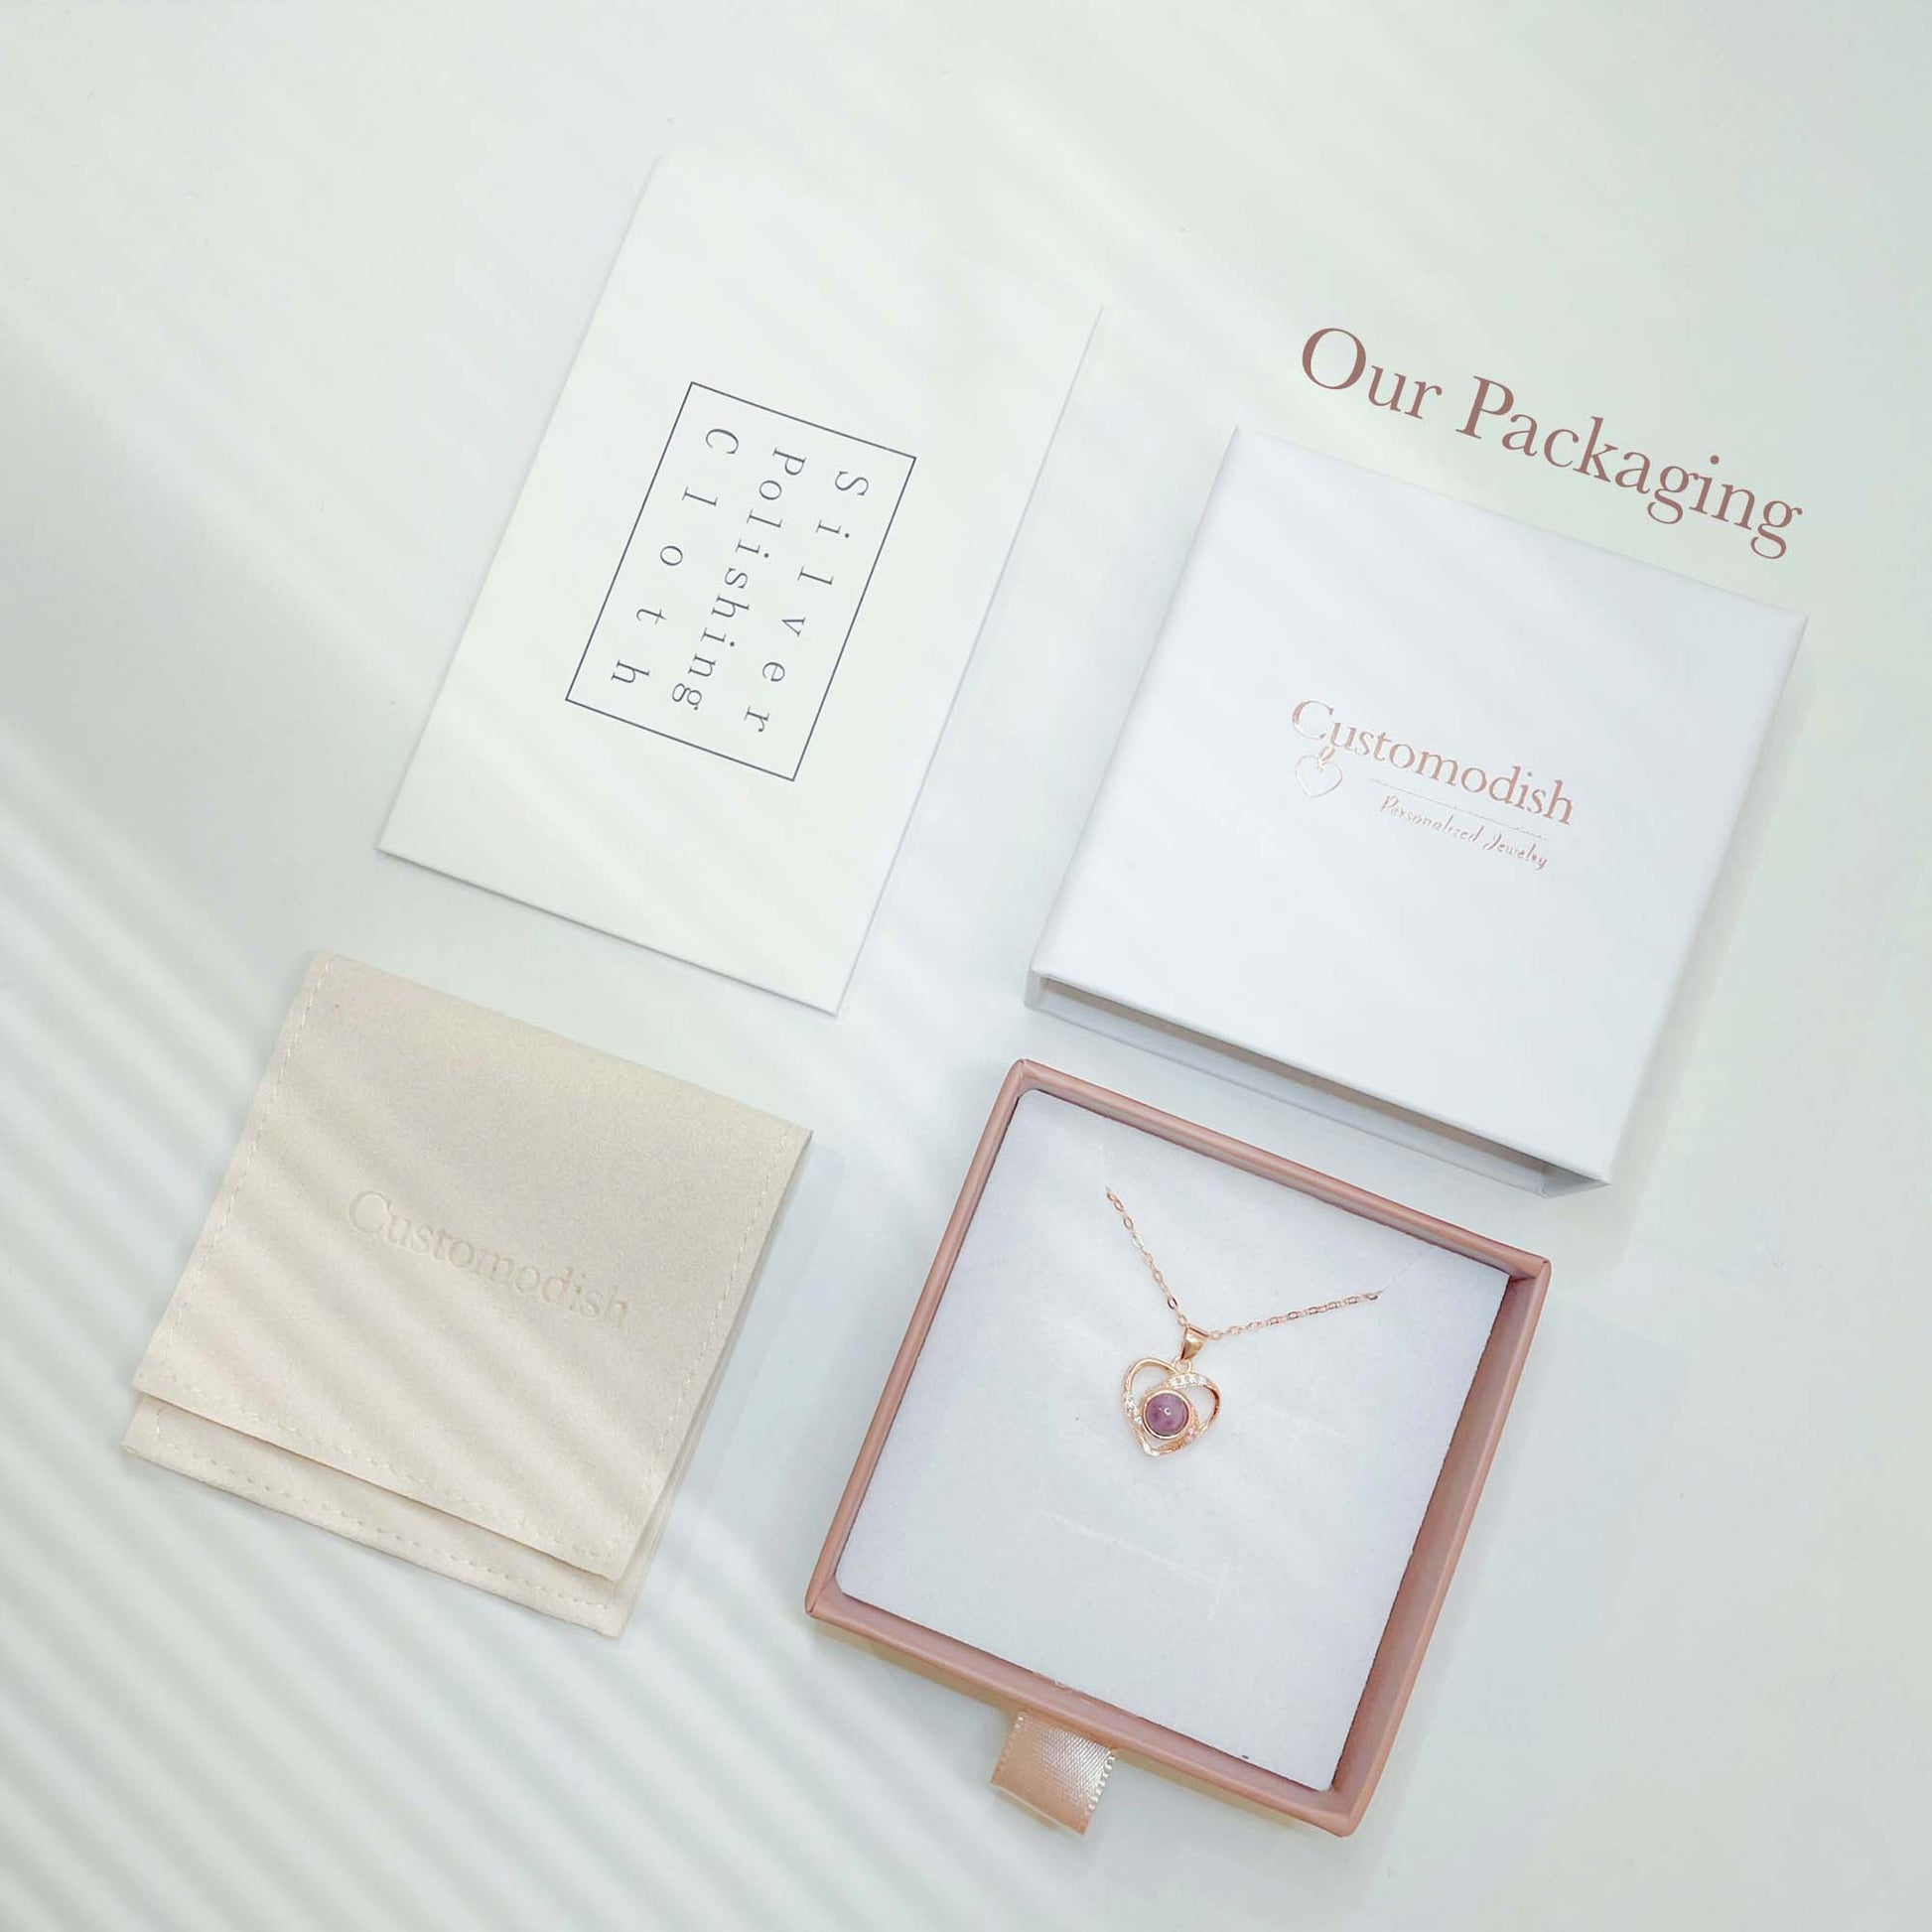 We offer a three piece package: a jewelry box, a jewelry pouch and a little gift bag.